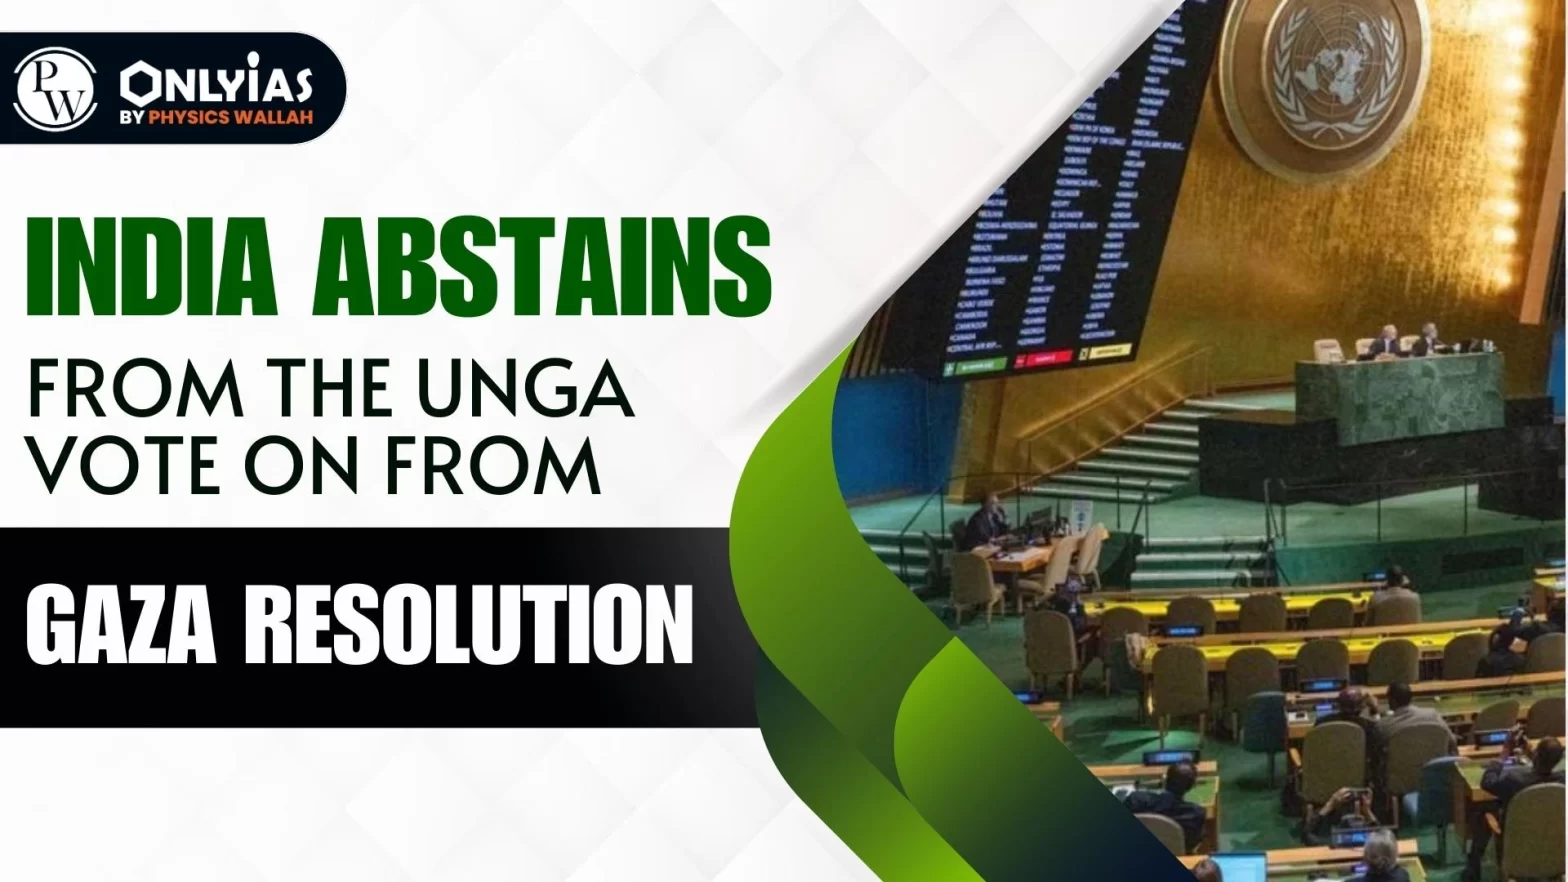 India Abstains from the UNGA Vote on Gaza Resolution